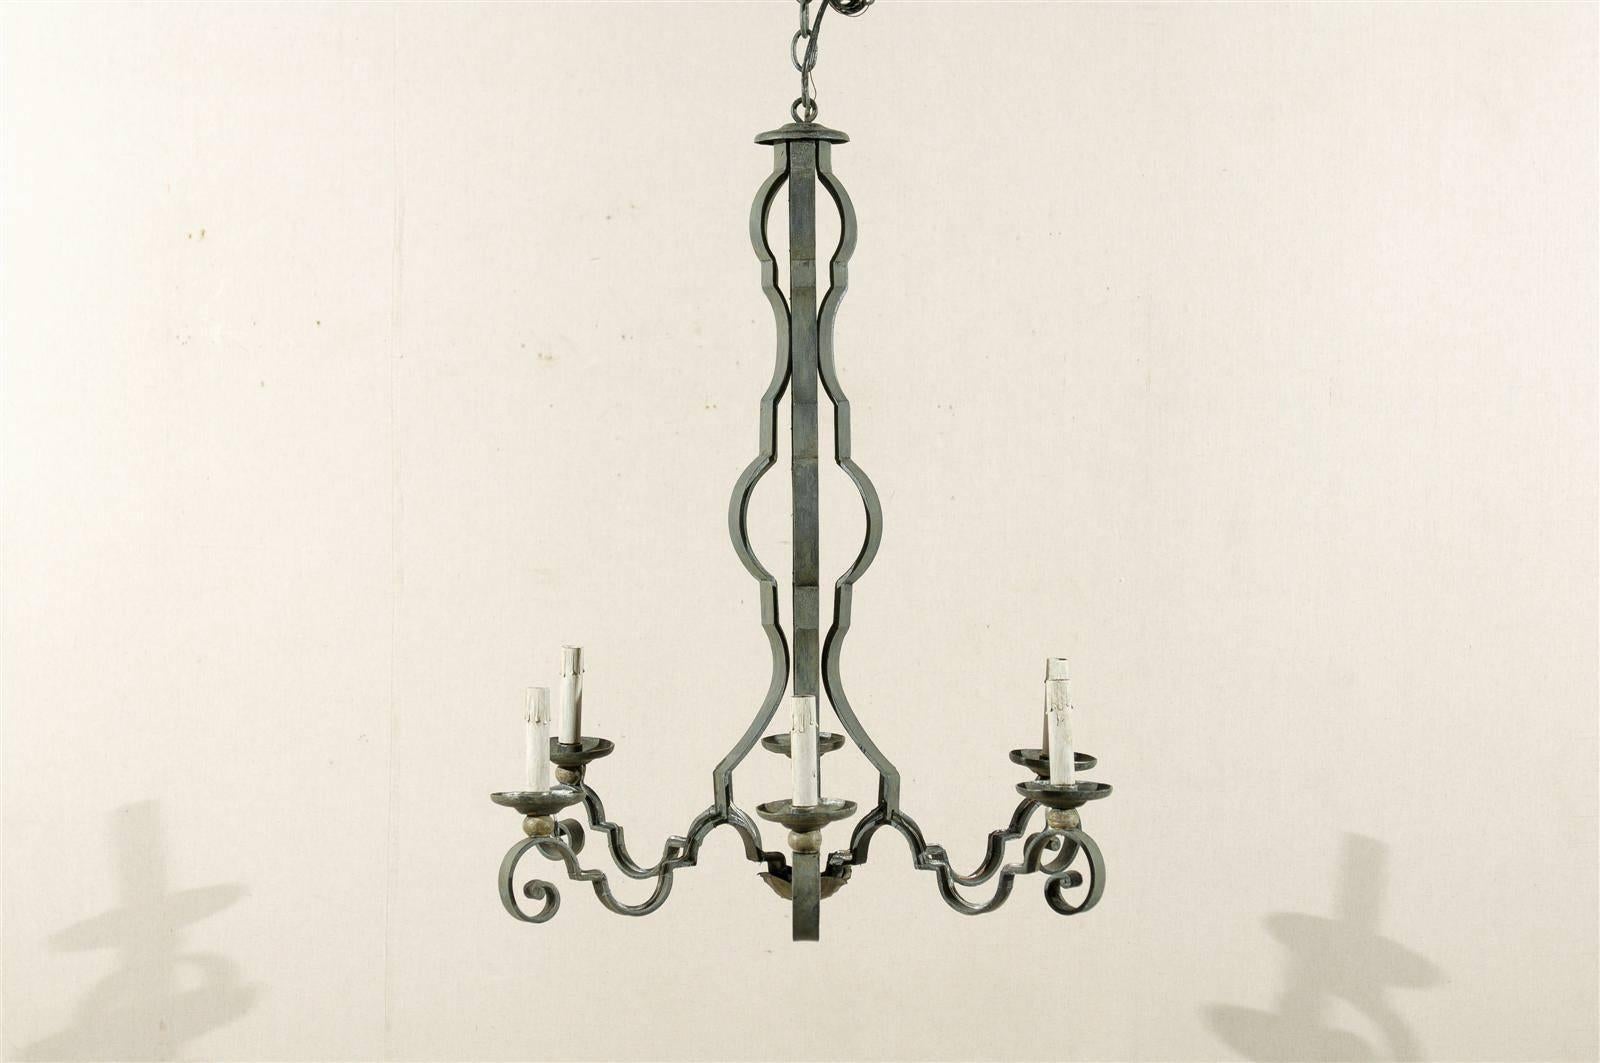 A French mid-20th century painted iron six-light chandelier with scroll arms.

This French painted iron chandelier has been rewired for the US and comes with a complimentary 3 foot chain and canopy painted to match.
 